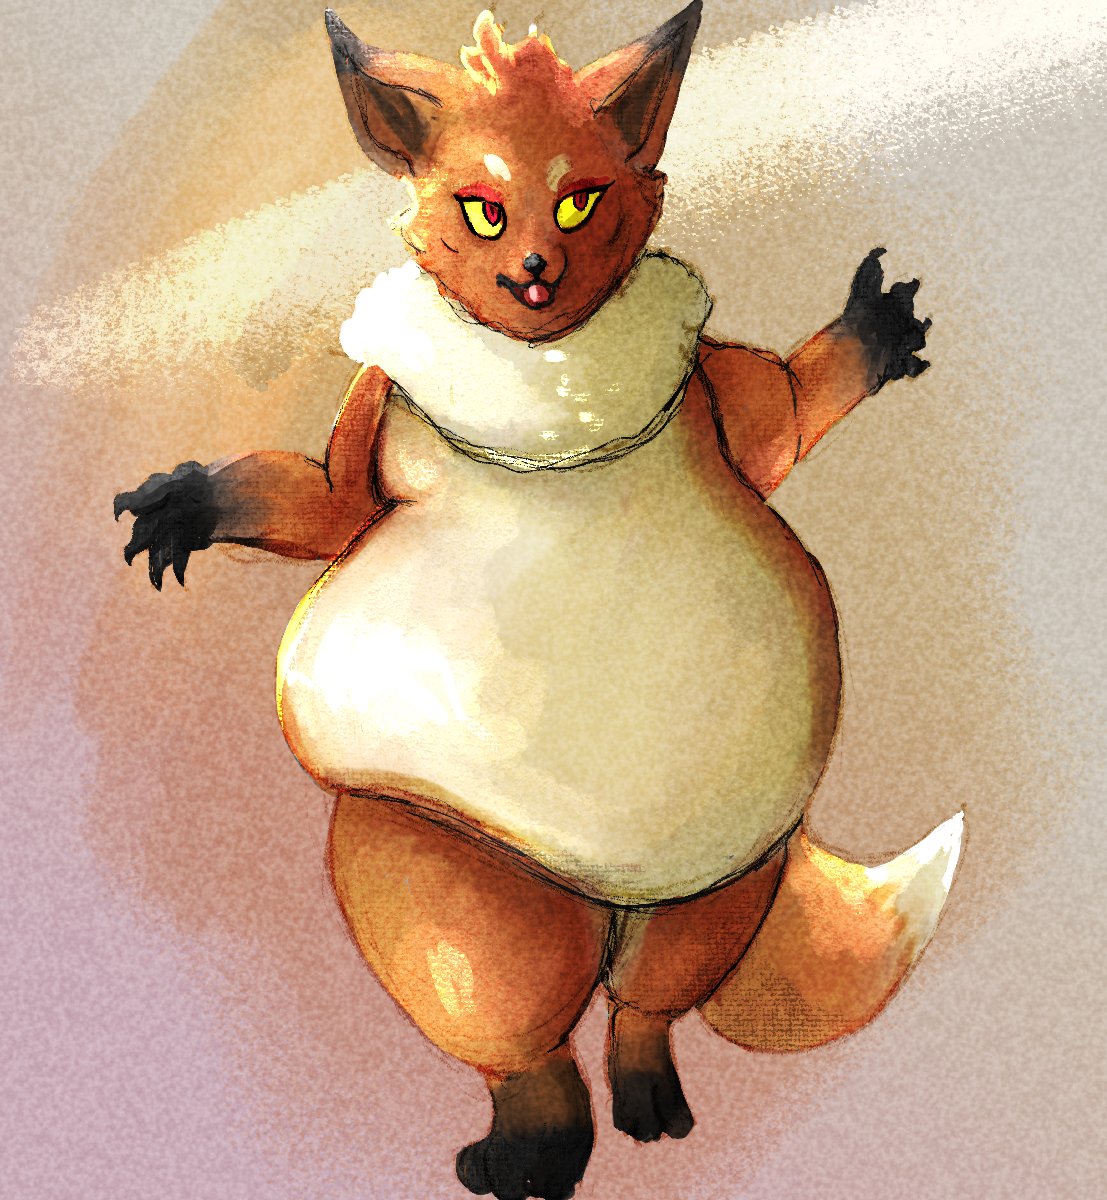 I've been messing around with a character design.
She ended up being this fat fox/eevee thing. I'm a fan of the 'Quadruped Pokemon walking on two legs' phenomena.